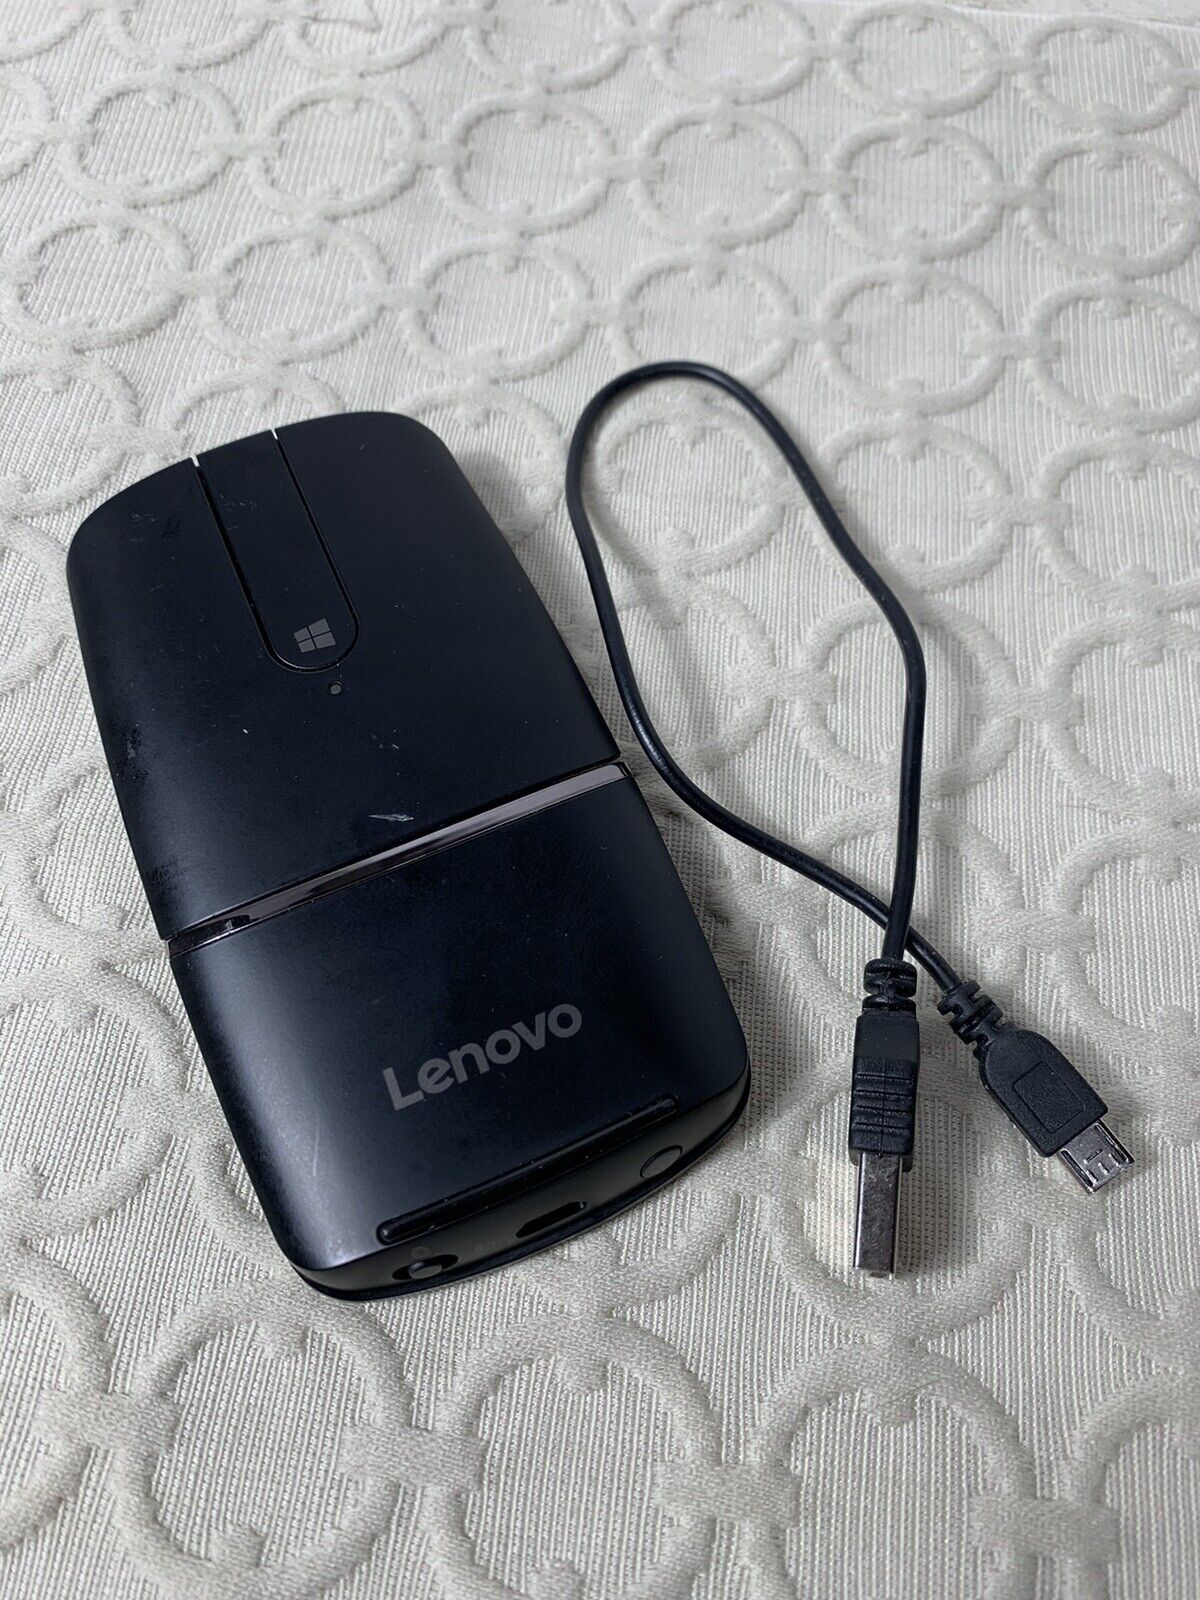 Lenovo Yoga Mouse with Laser Presenter Black 2.4GHz Wireless-Tested